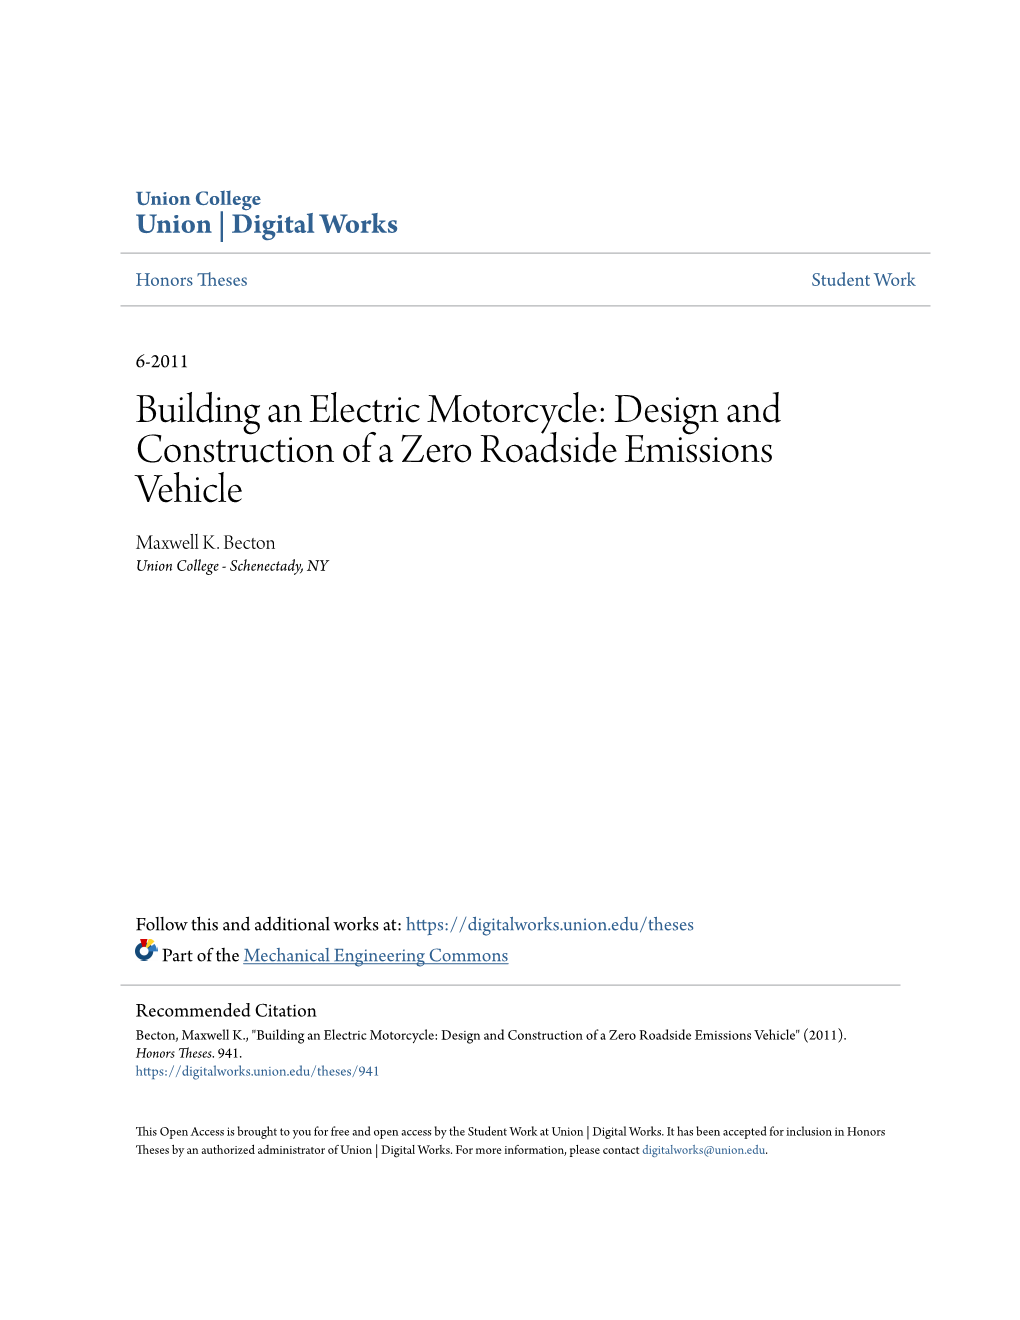 Building an Electric Motorcycle: Design and Construction of a Zero Roadside Emissions Vehicle Maxwell K